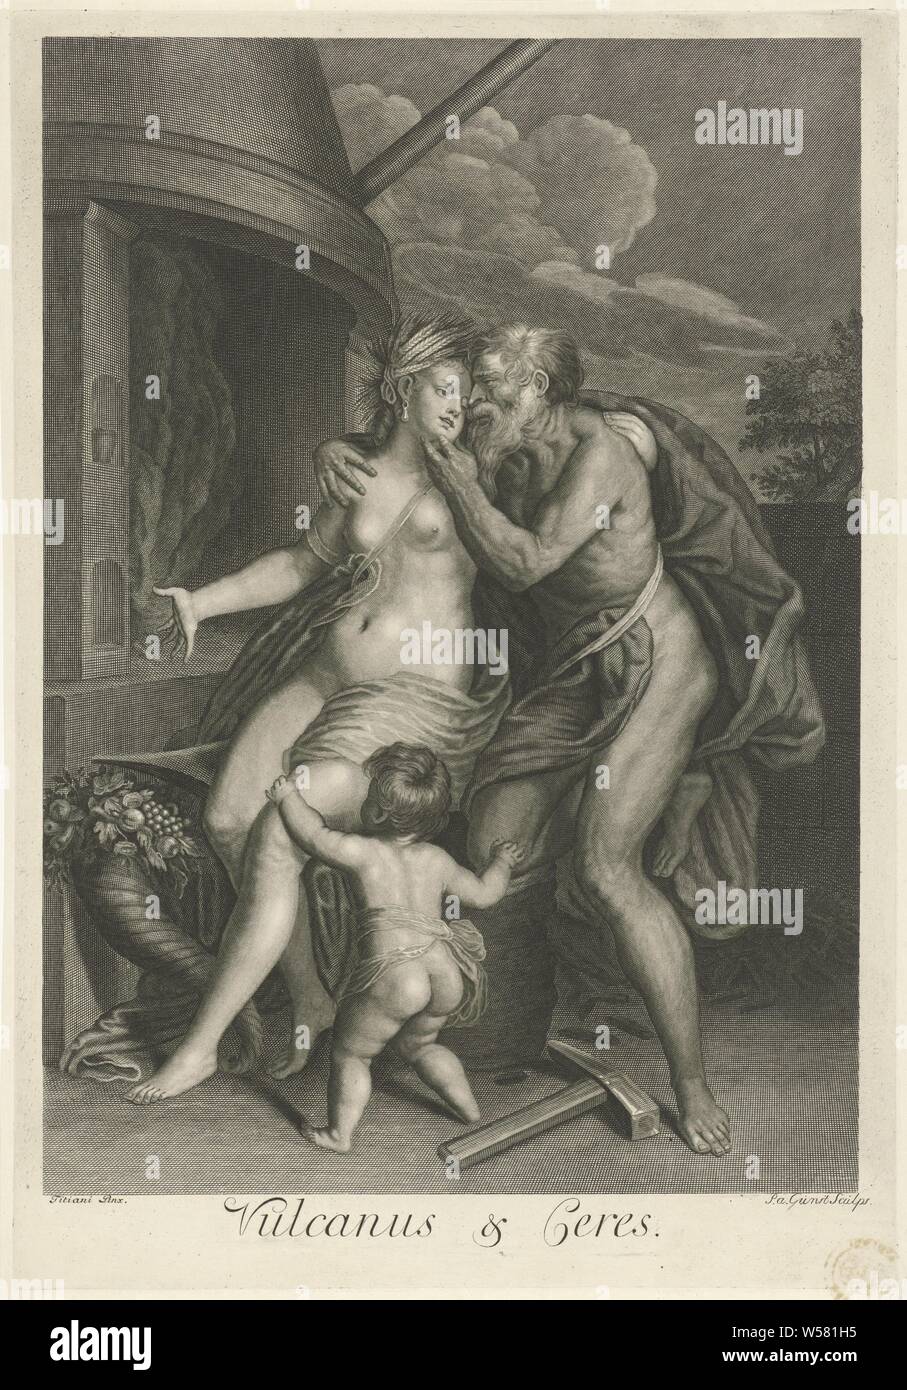 Vulcan and Ceres (title on object) Mythological love stories (series title), Ceres is in front of the fire of the blacksmith. Vulcan kisses her. In the foreground Cupid and the cornucopia, love affairs or Vulcan, love affairs of Ceres, (story of) Cupid, Amor (Eros), Pieter van Gunst (mentioned on object), Amsterdam, 1659 - 1731, paper, engraving, h 428 mm × w 298 mm Stock Photo